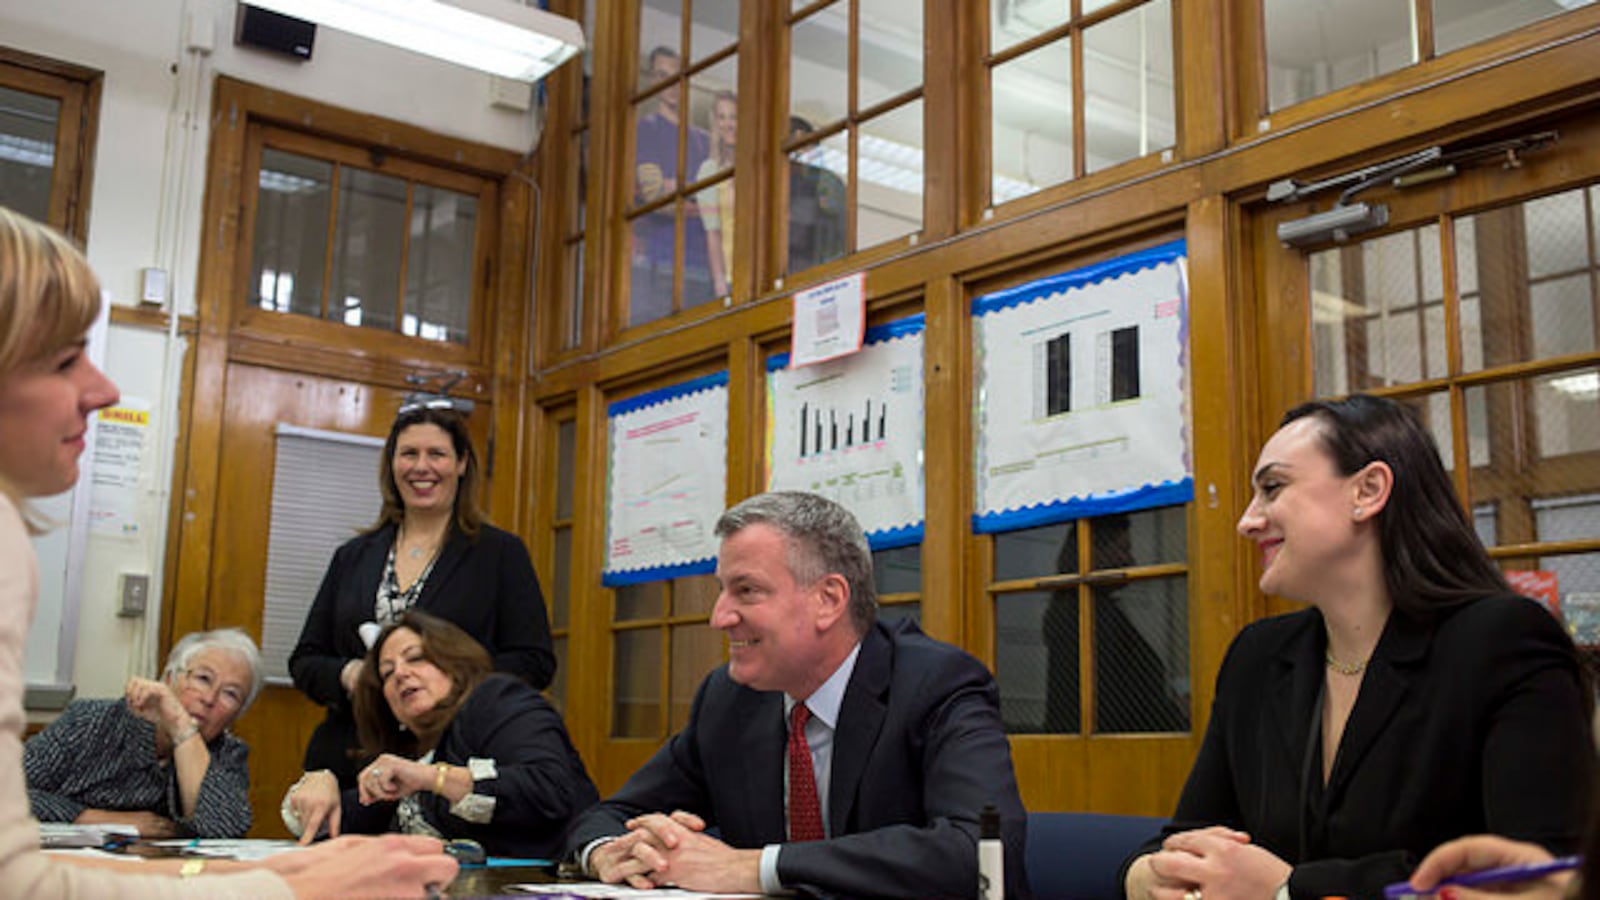 Mayor Bill de Blasio meets with faculty at Automotive High School, one of only two Renewal Schools where staff are required to reapply for their positions. Credit: Ed Reed/Mayoral Photography Office.